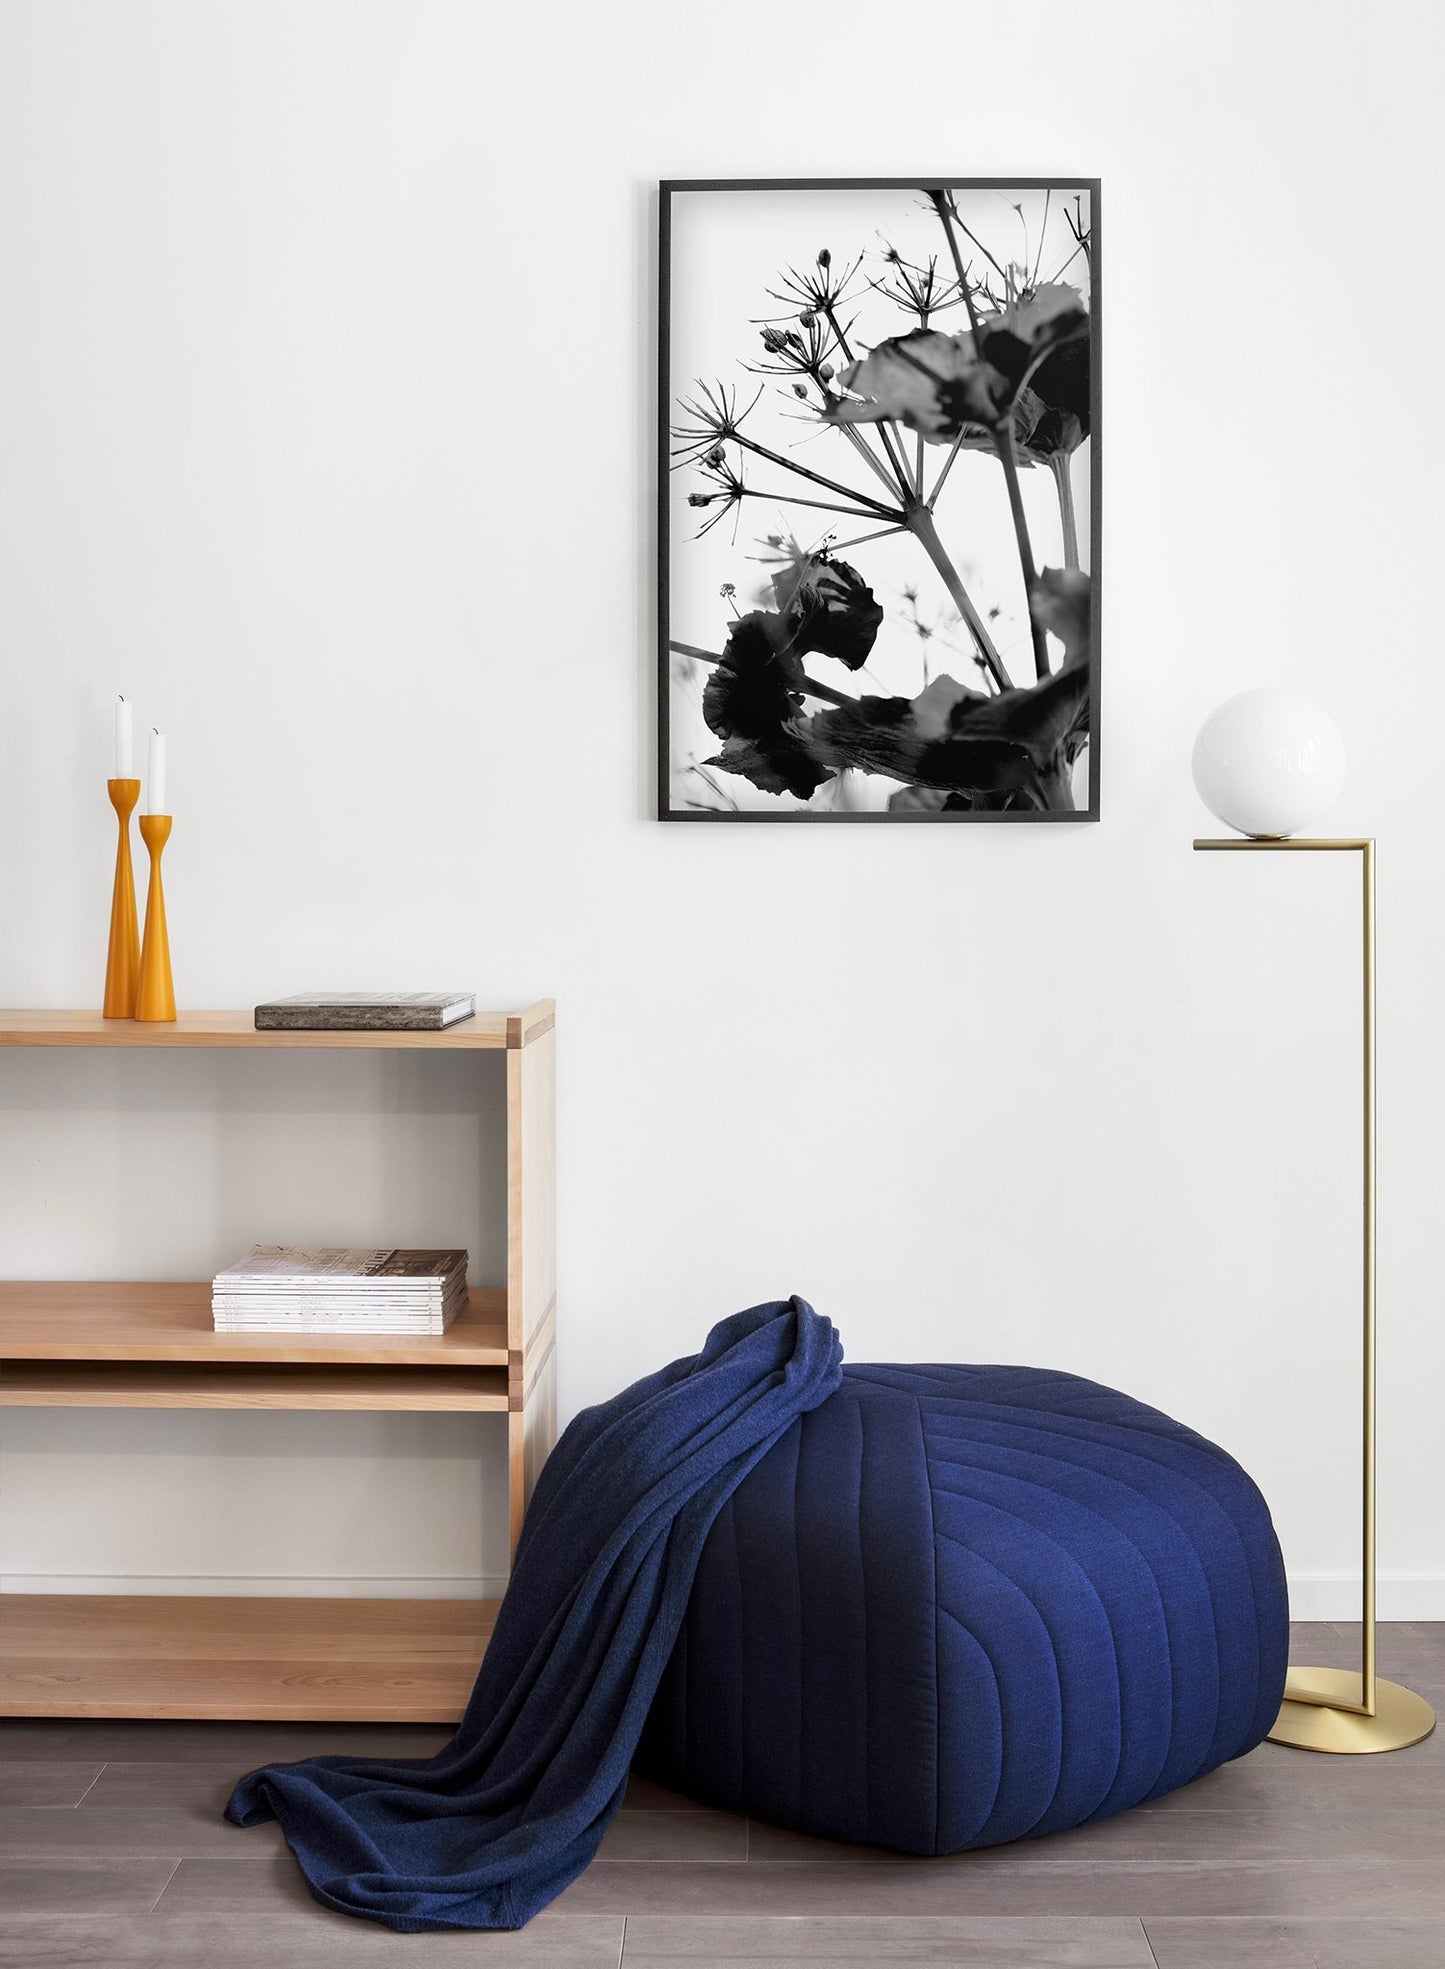 Stickler in the Wind modern minimalist black and white nature photography poster by Opposite Wall - Living Room